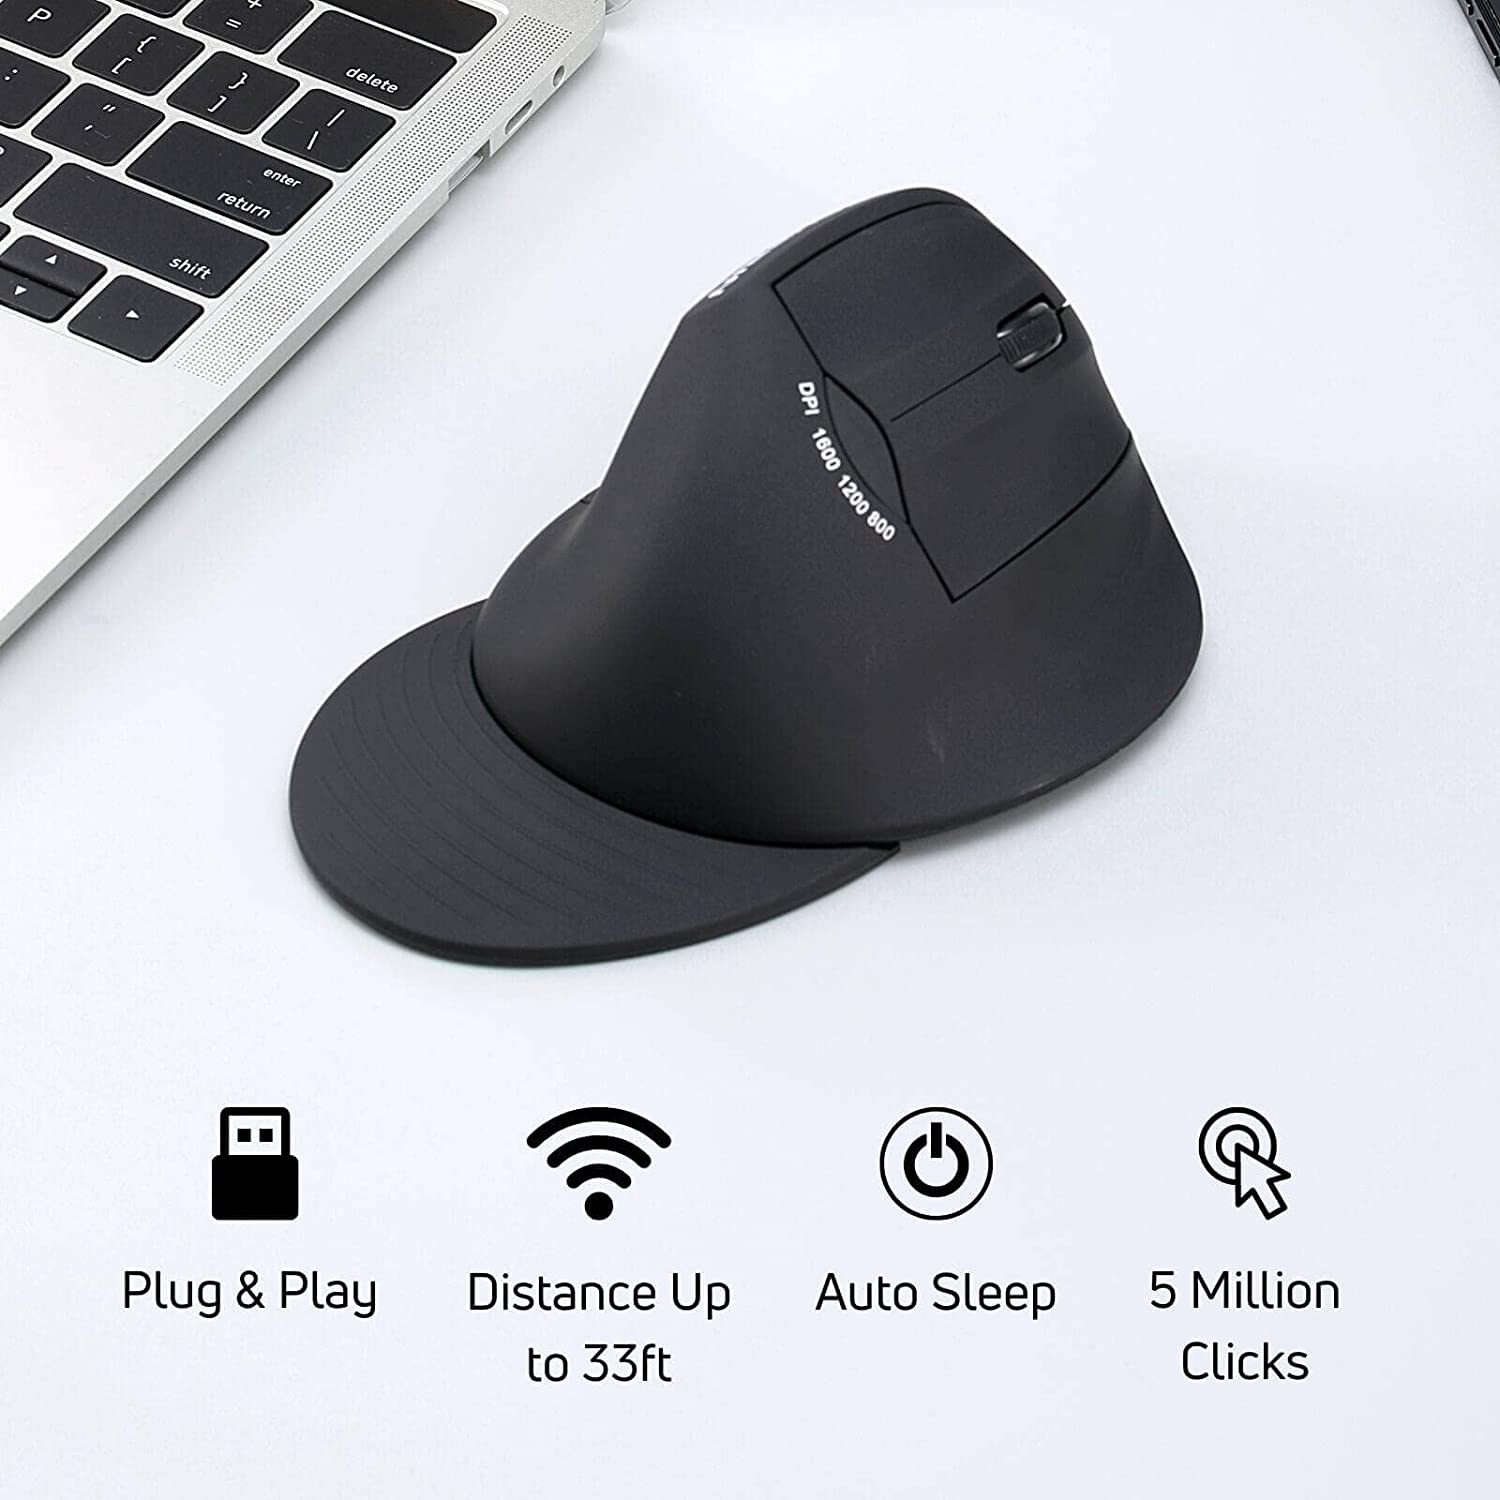 Vertical Ergonomic Mouse, Sculpted Wireless Mouse with Wrist Support, 3 DPI Levels & 6 Buttons for Computer, Laptop & Macbook, Right-Handed, Black